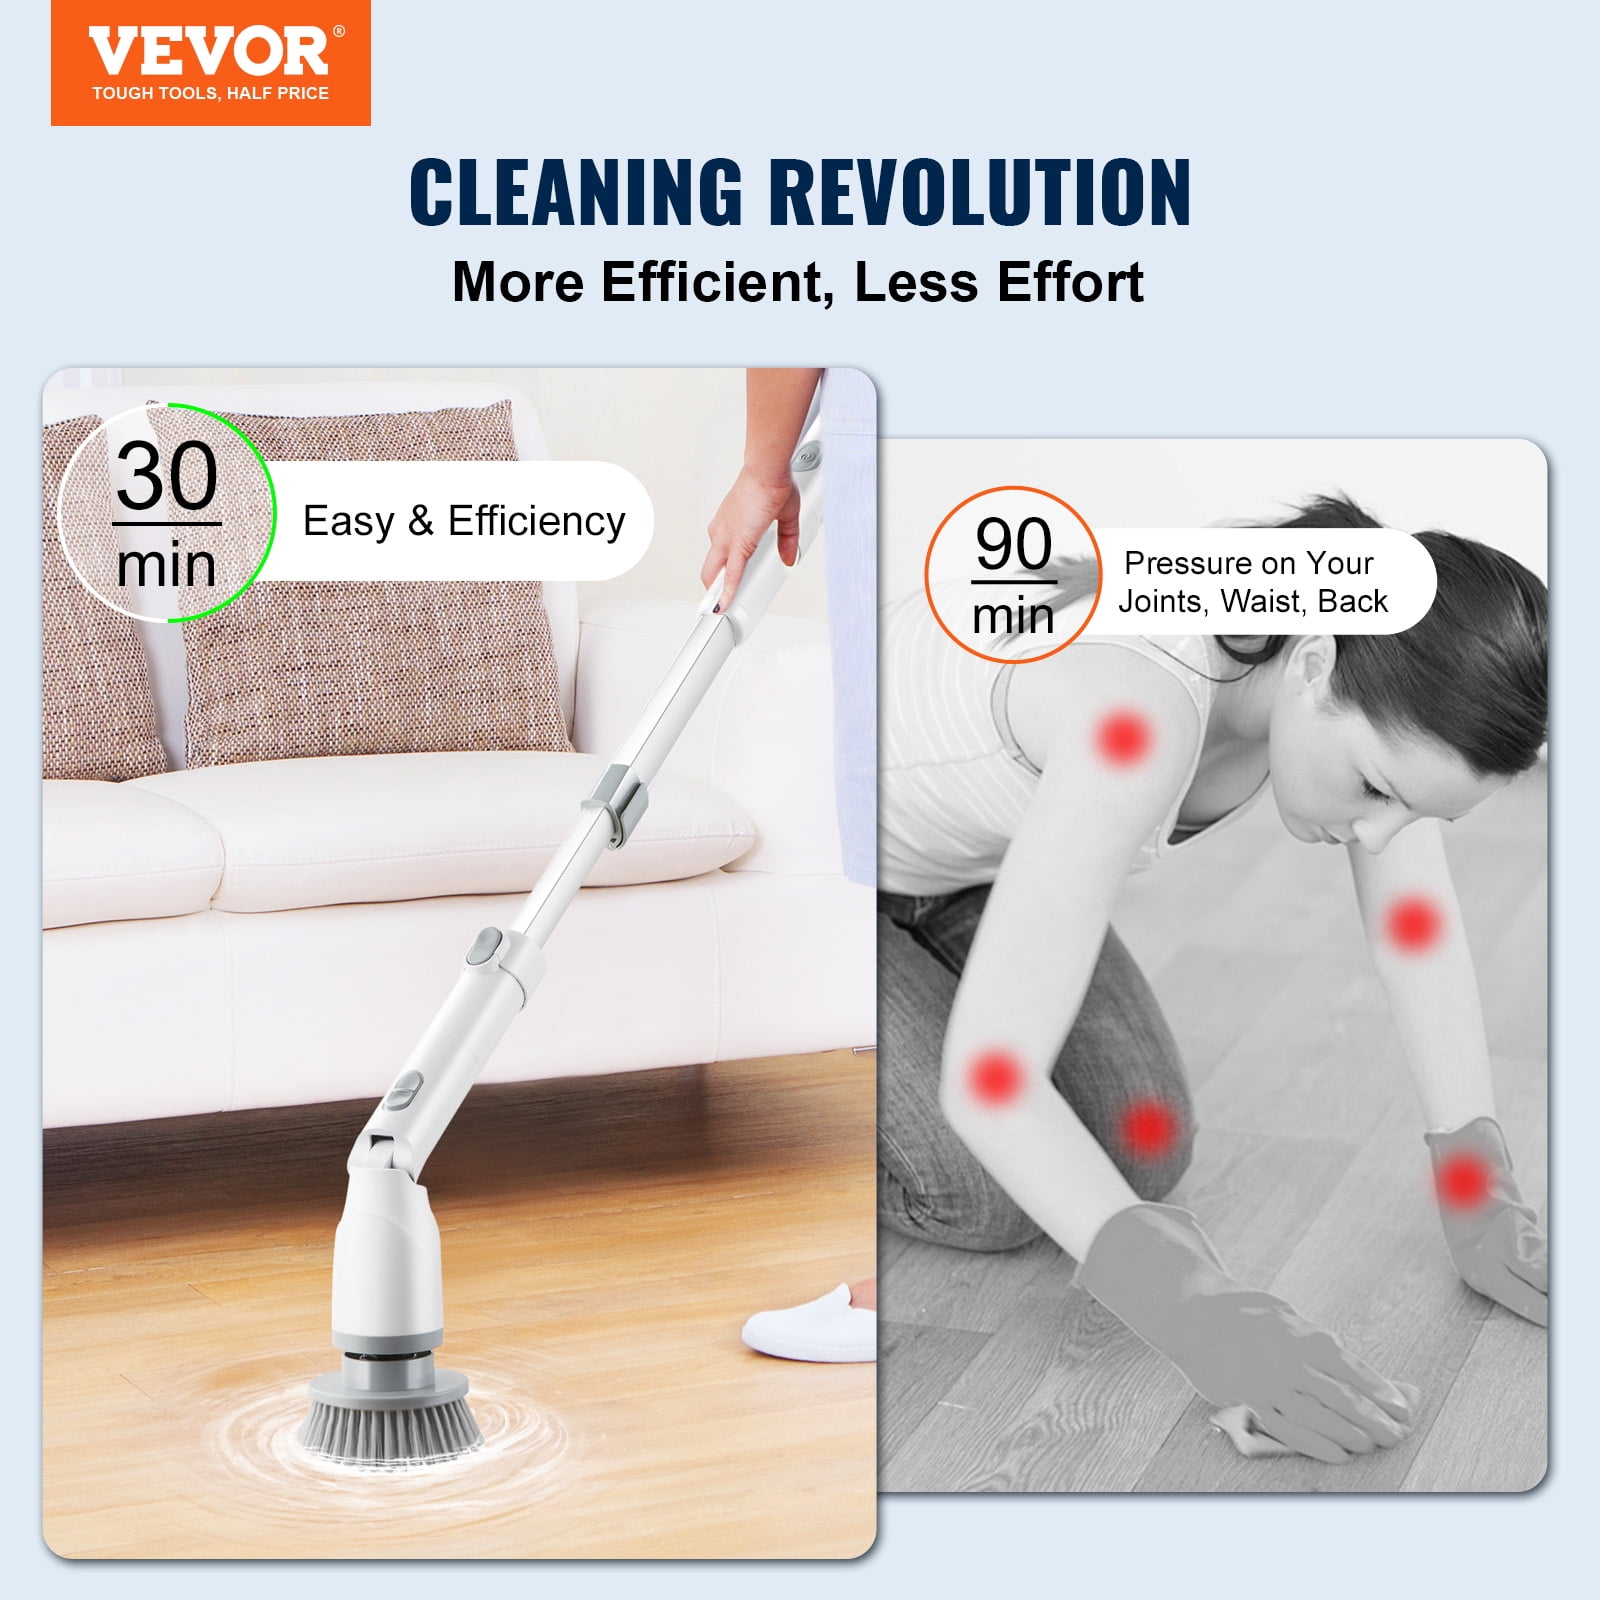 Geniani Electric Spin Scrubber - 360 Cordless Powerful Scrub Brush for Cleaning Bathroom, Tile, Floor, Tub and Shower with Adjustable Extension Handle